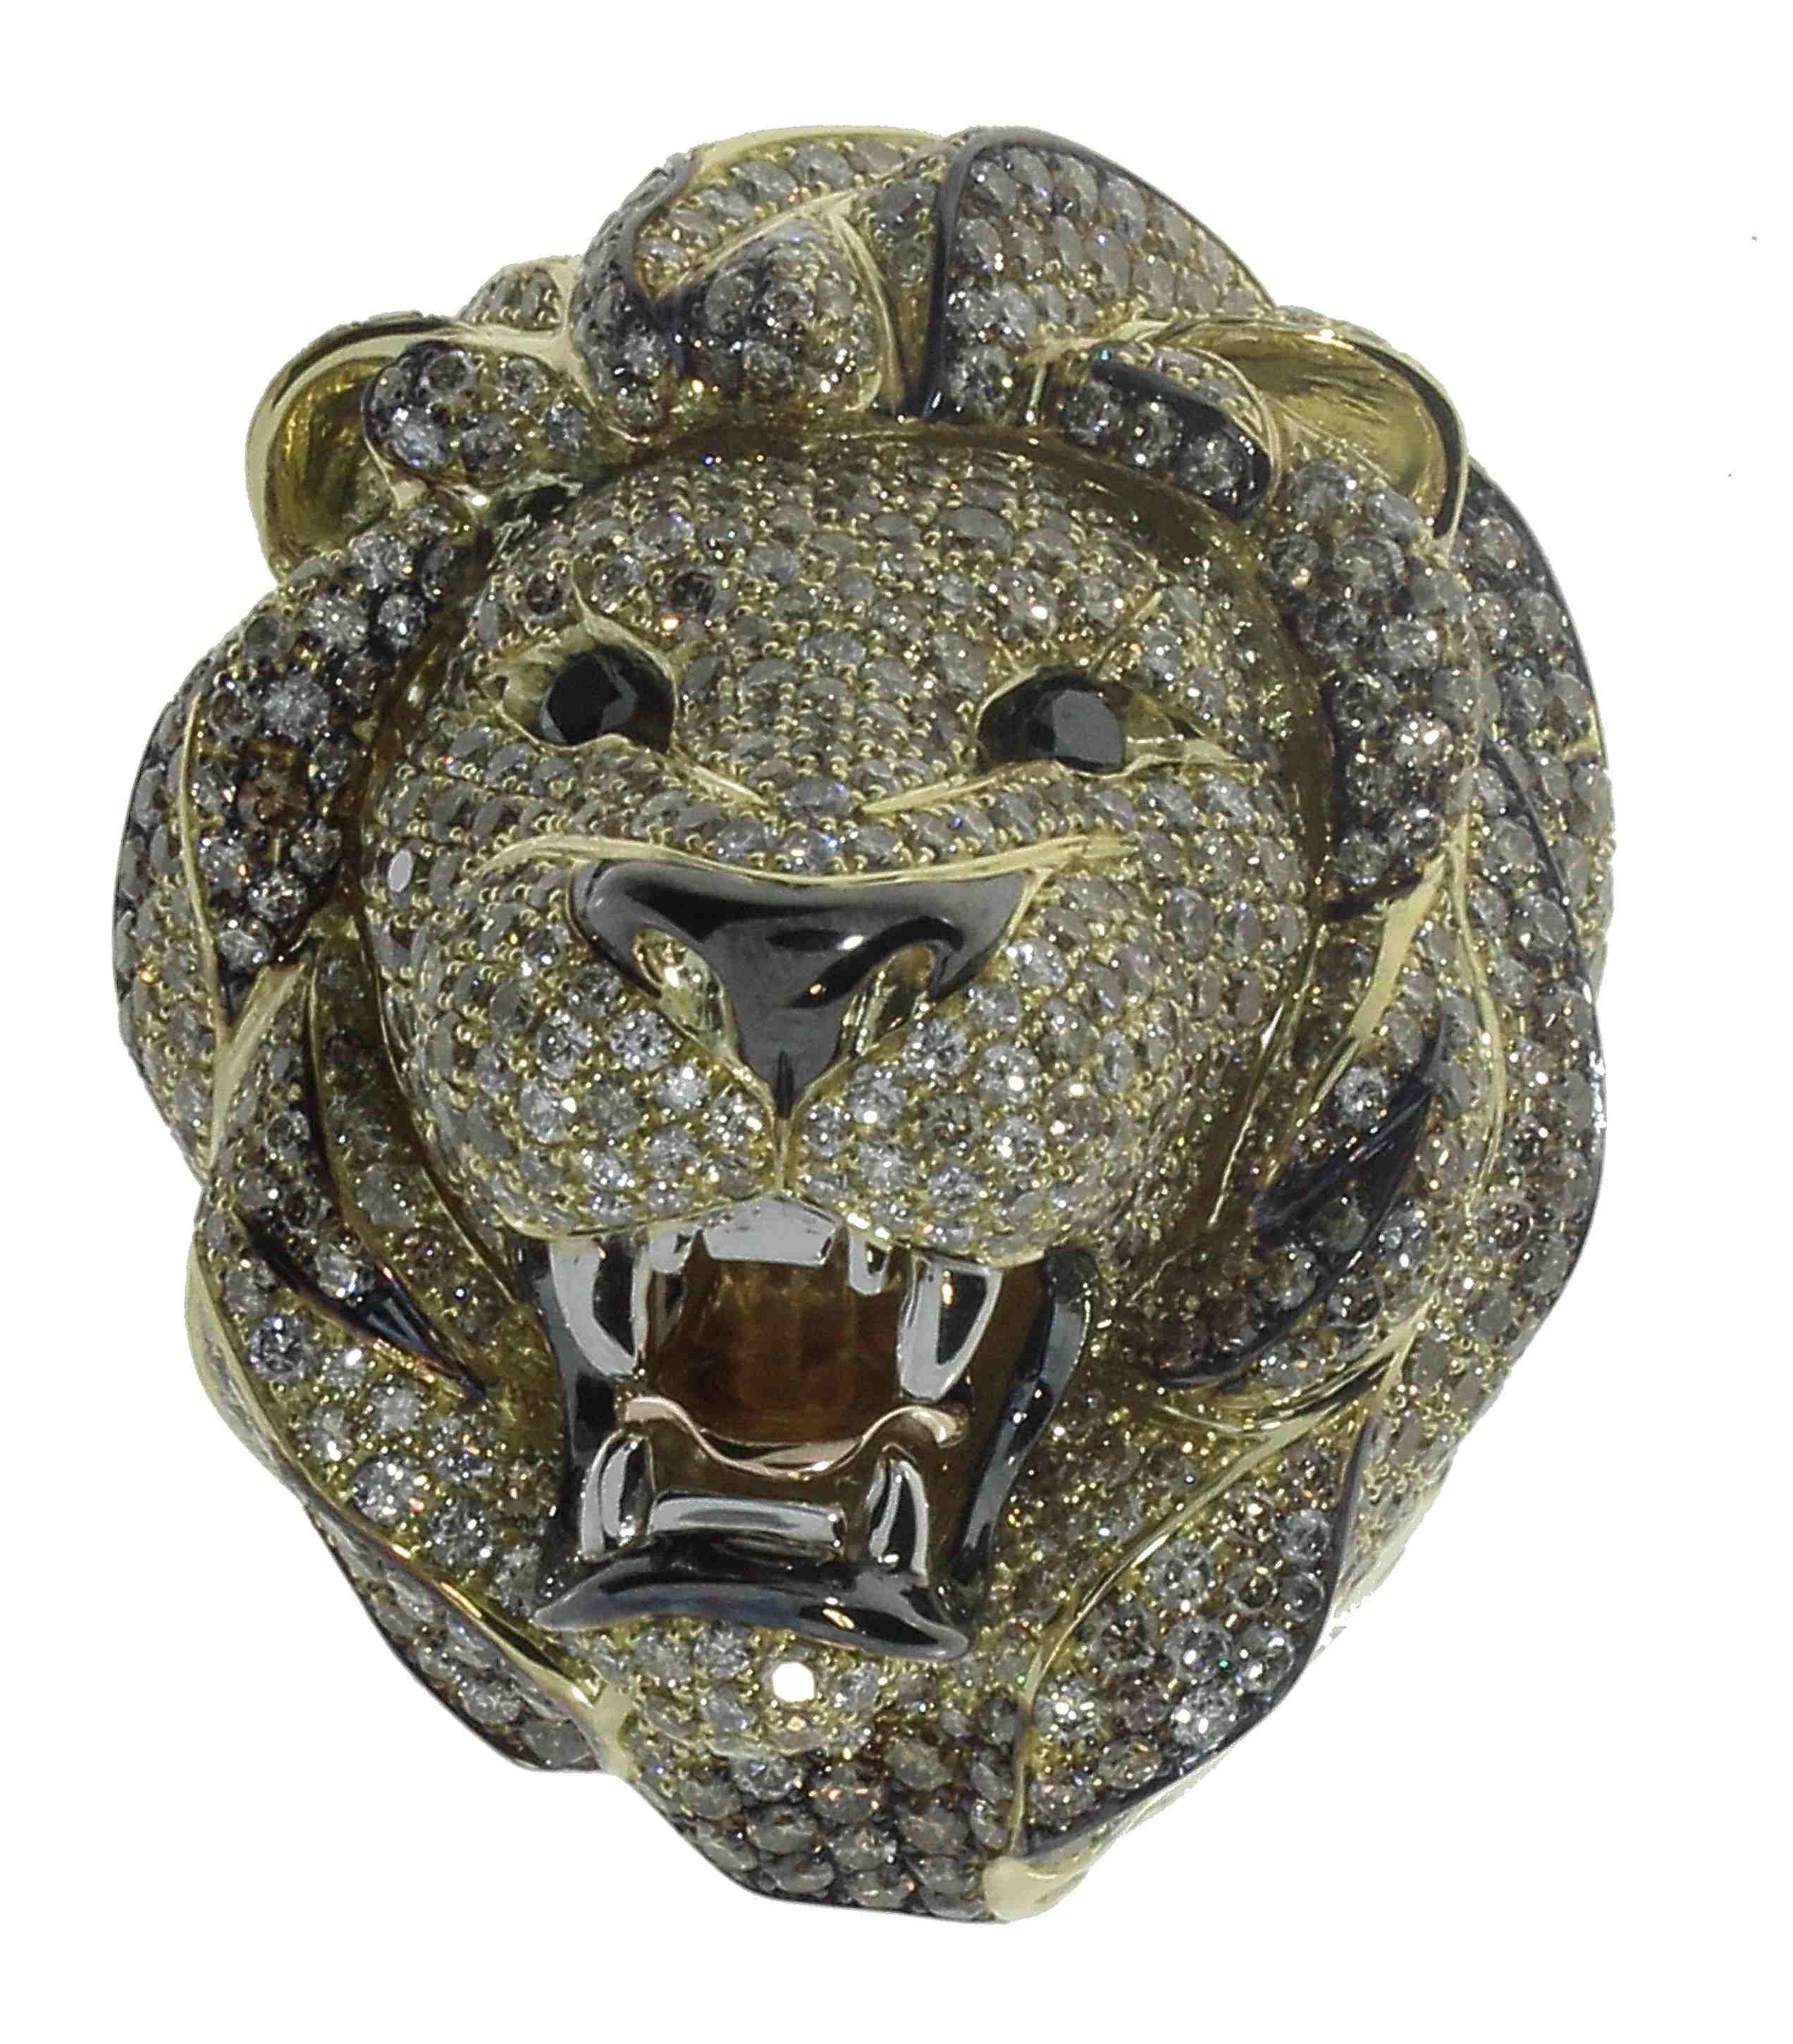 Lions once inhabited large parts of Asia, Europe and the entire African continent. Therefore, the lion appears in the mythologies and folklore of numerous cultures all over the globe.

Lions are often used as symbols of royalty. 